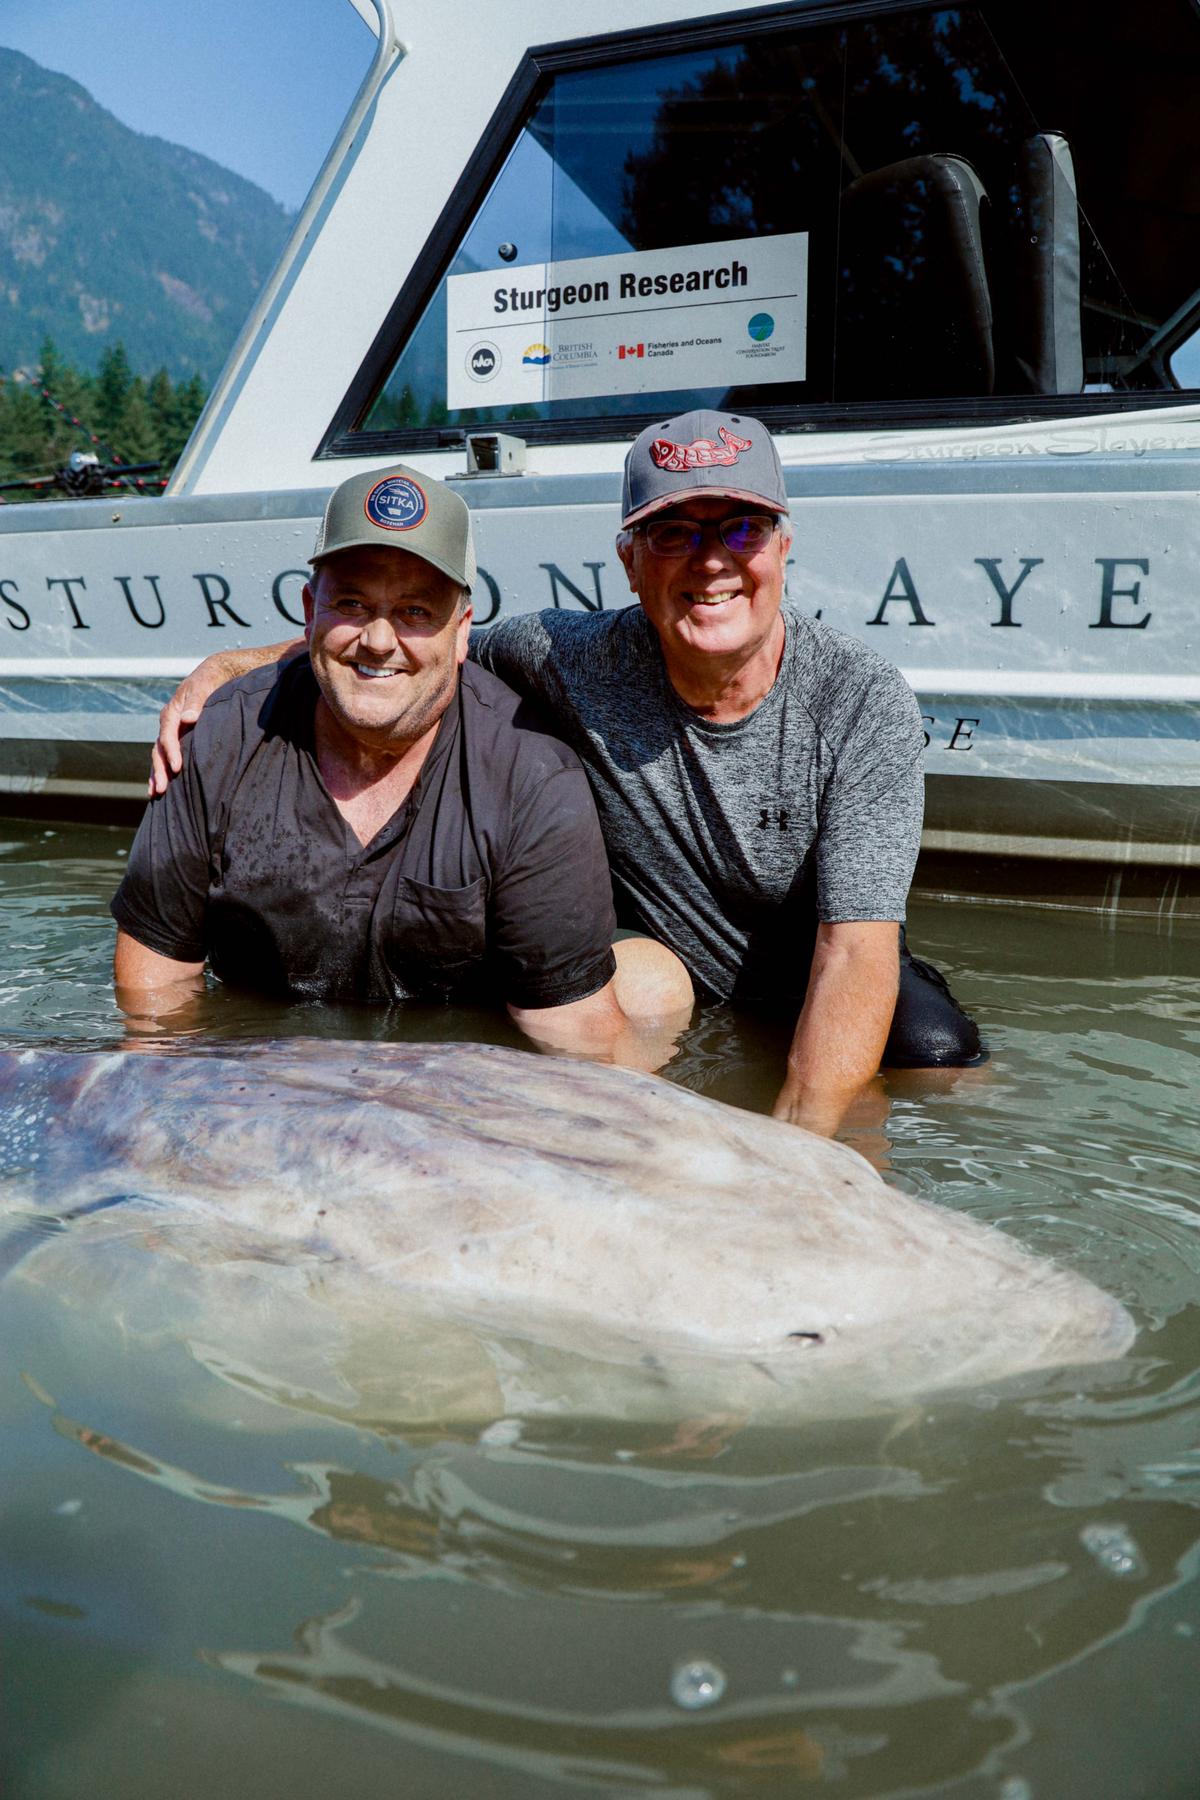 Longtime Sturgeon Slayers guests Bryant Bowtell (L) and brother Barry pose with the sturgeon. (Courtesy of <a href="http://www.sturgeonslayers.com/">Sturgeon Slayers</a>)